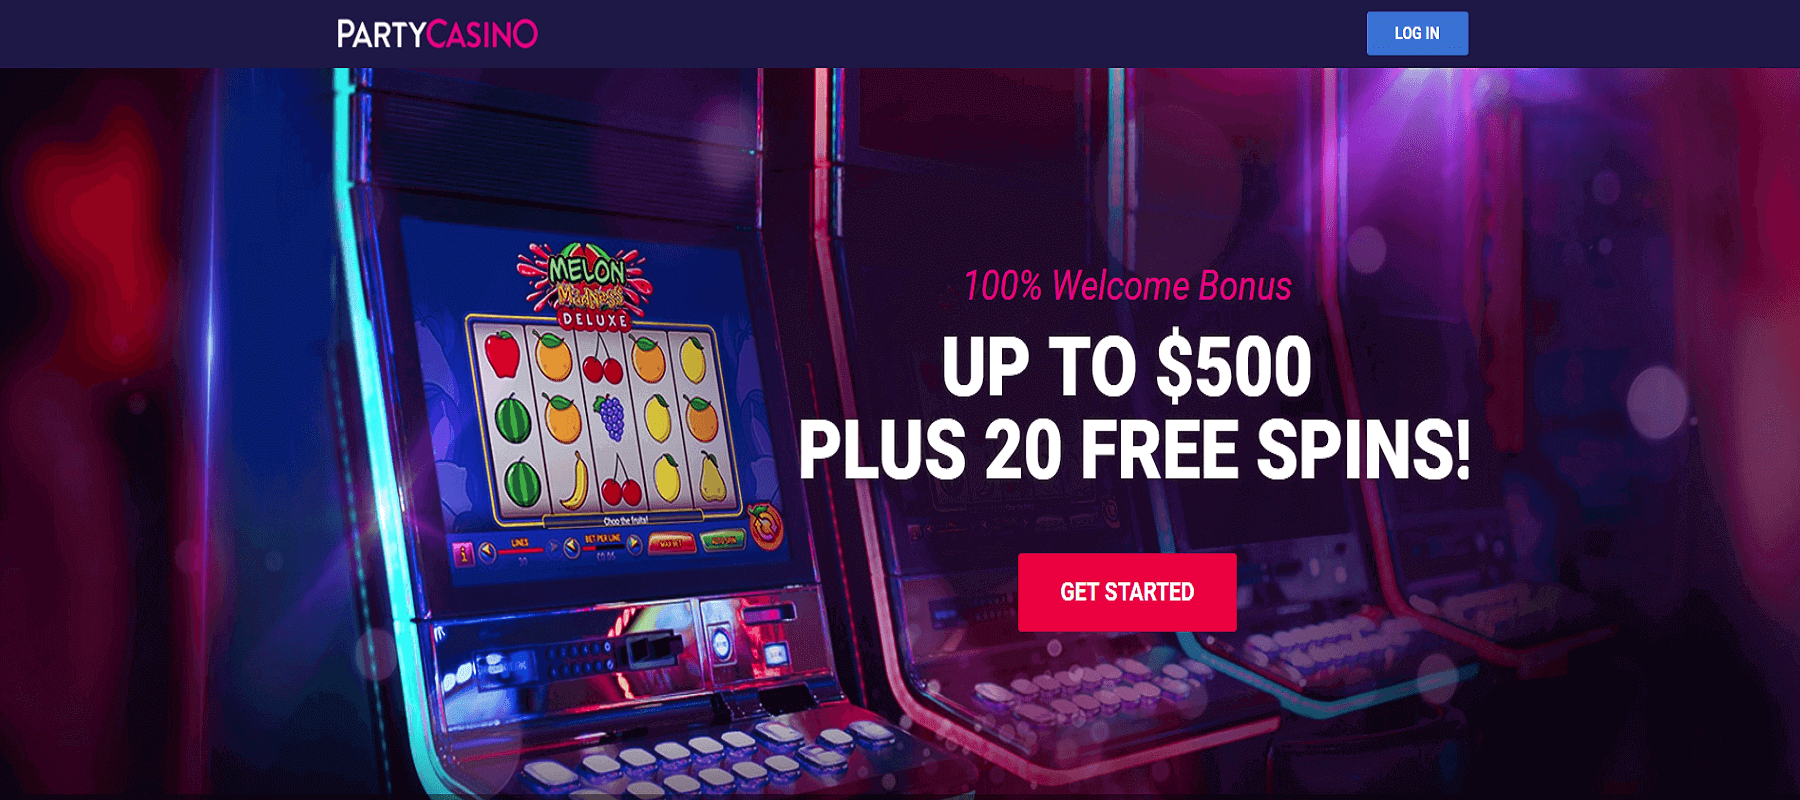 Party Casino 100% up to $500 + 20 Free Spins Welcome Bonus Screenshot